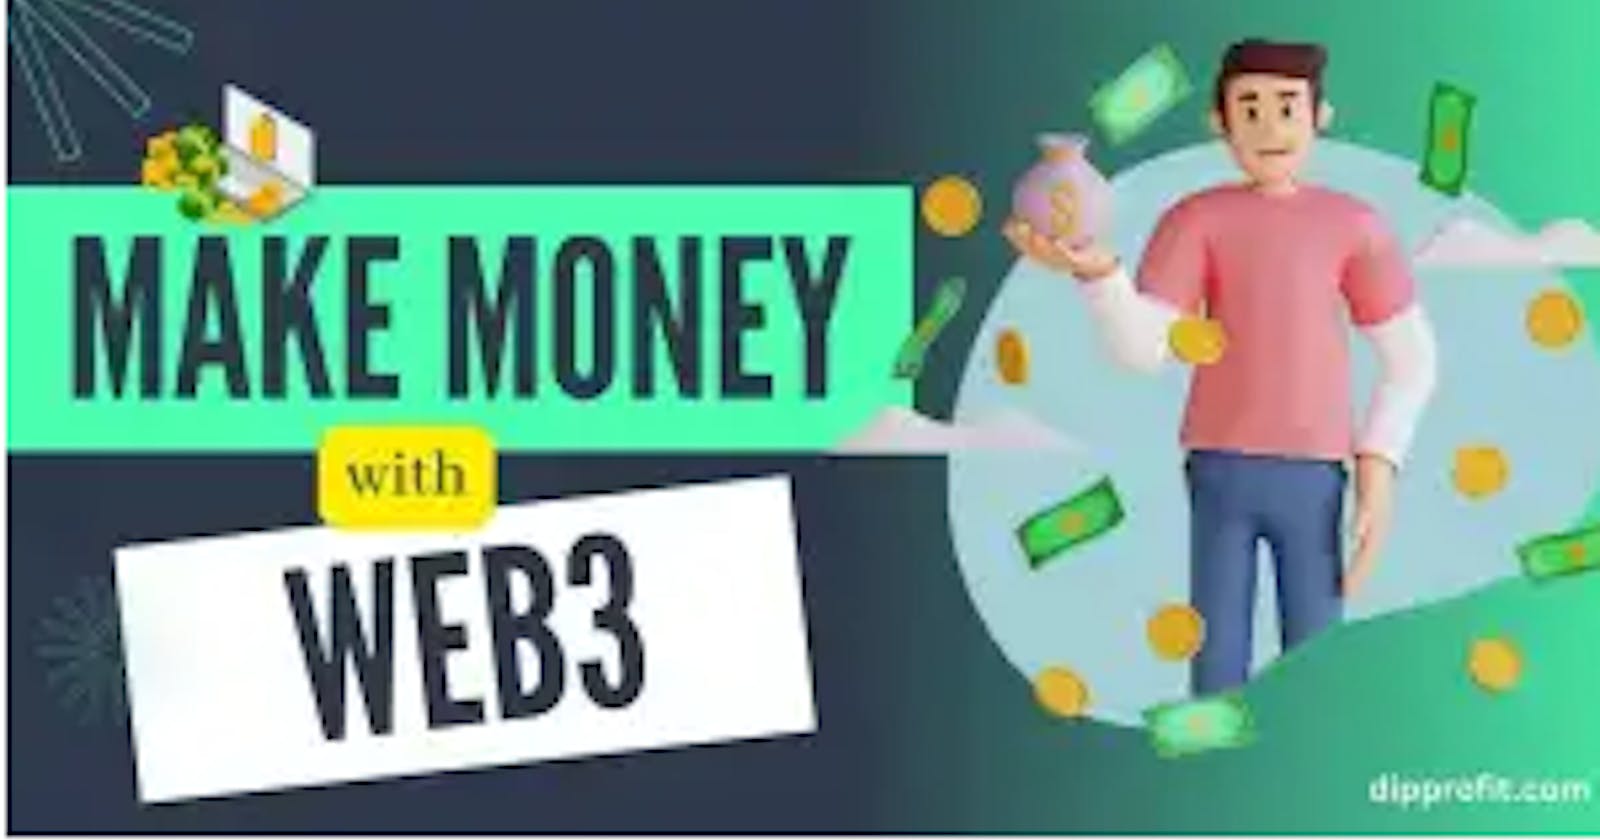 How To Make Money With Web3 in 2023